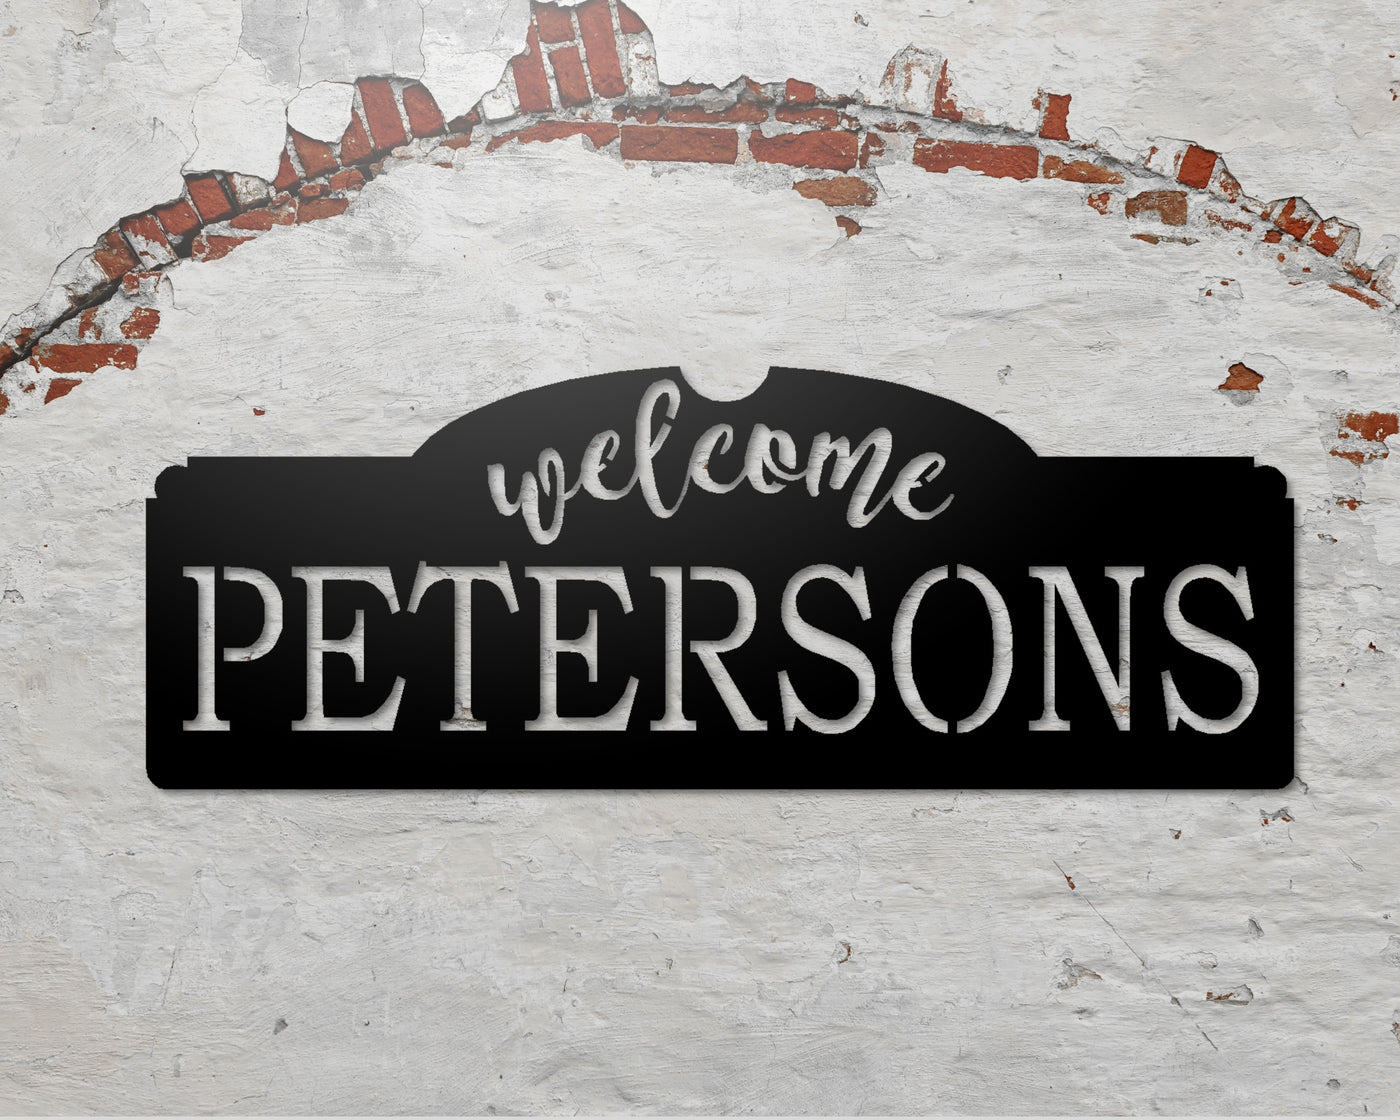 Personalized Welcome Metal Sign with Family Name - Madison Iron and Wood - Personalized sign - metal outdoor decor - Steel deocrations - american made products - veteran owned business products - fencing decorations - fencing supplies - custom wall decorations - personalized wall signs - steel - decorative post caps - steel post caps - metal post caps - brackets - structural brackets - home improvement - easter - easter decorations - easter gift - easter yard decor